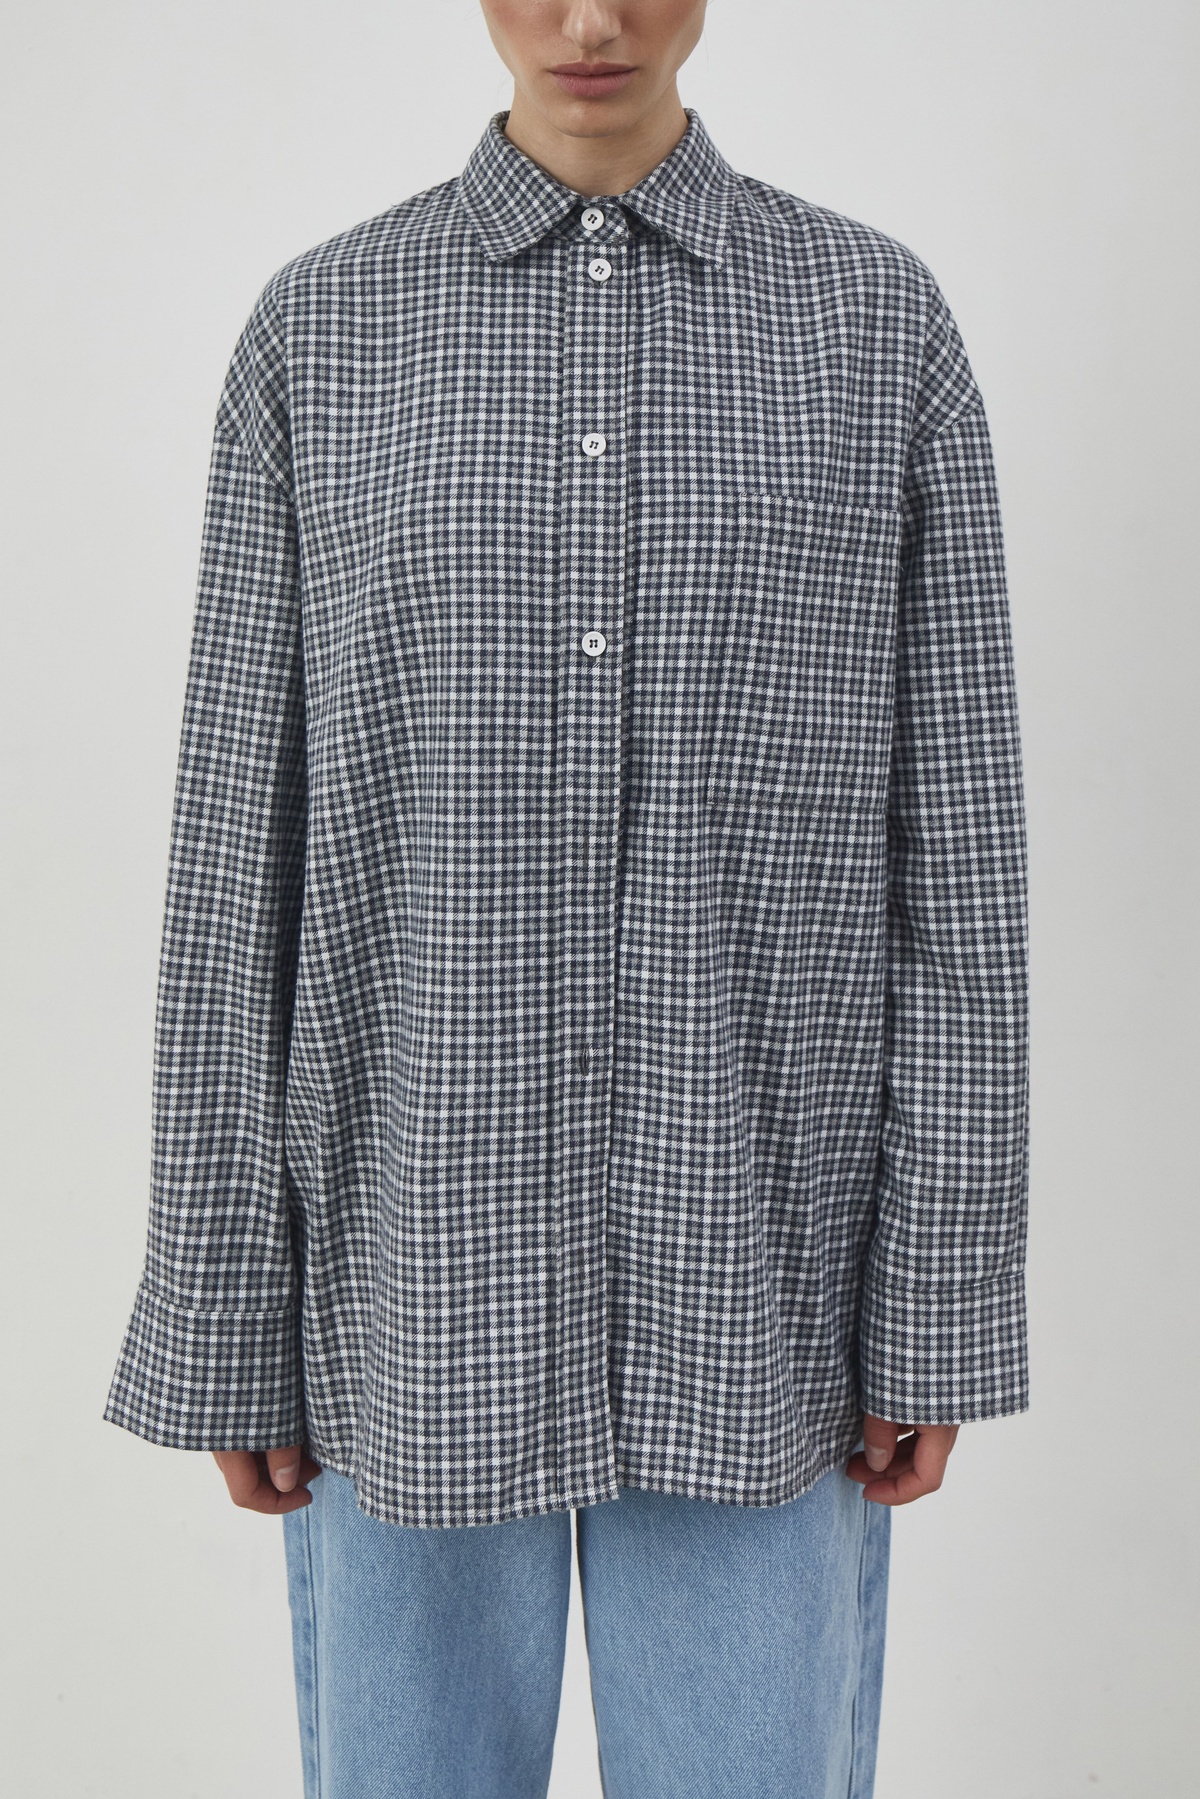 Checked Shirt with a Pocket